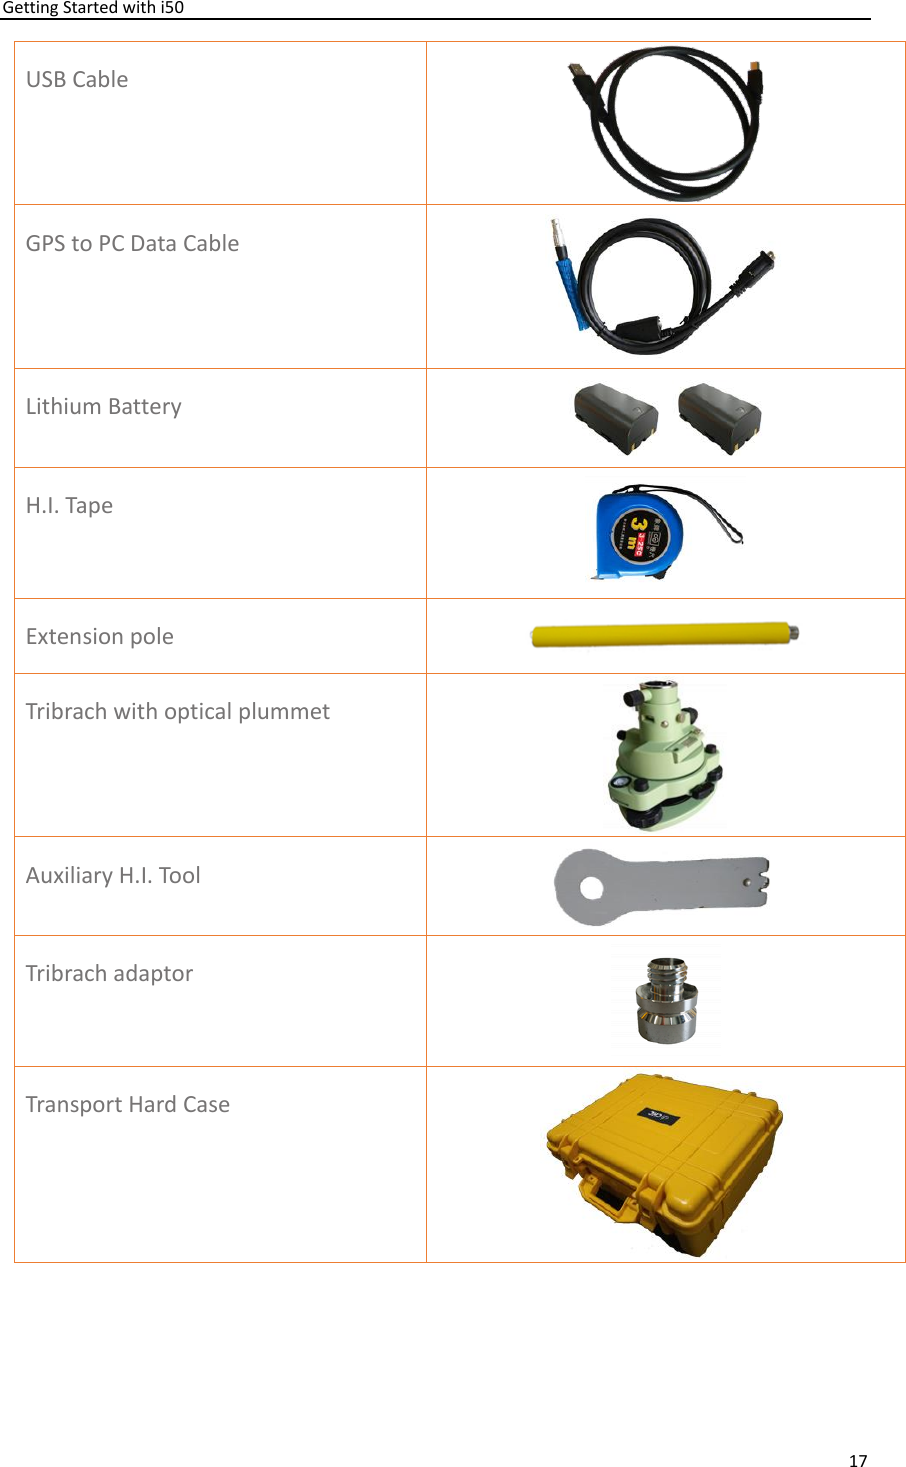 Getting Started with i50 17  USB Cable  GPS to PC Data Cable  Lithium Battery   H.I. Tape  Extension pole  Tribrach with optical plummet  Auxiliary H.I. Tool    Tribrach adaptor  Transport Hard Case  